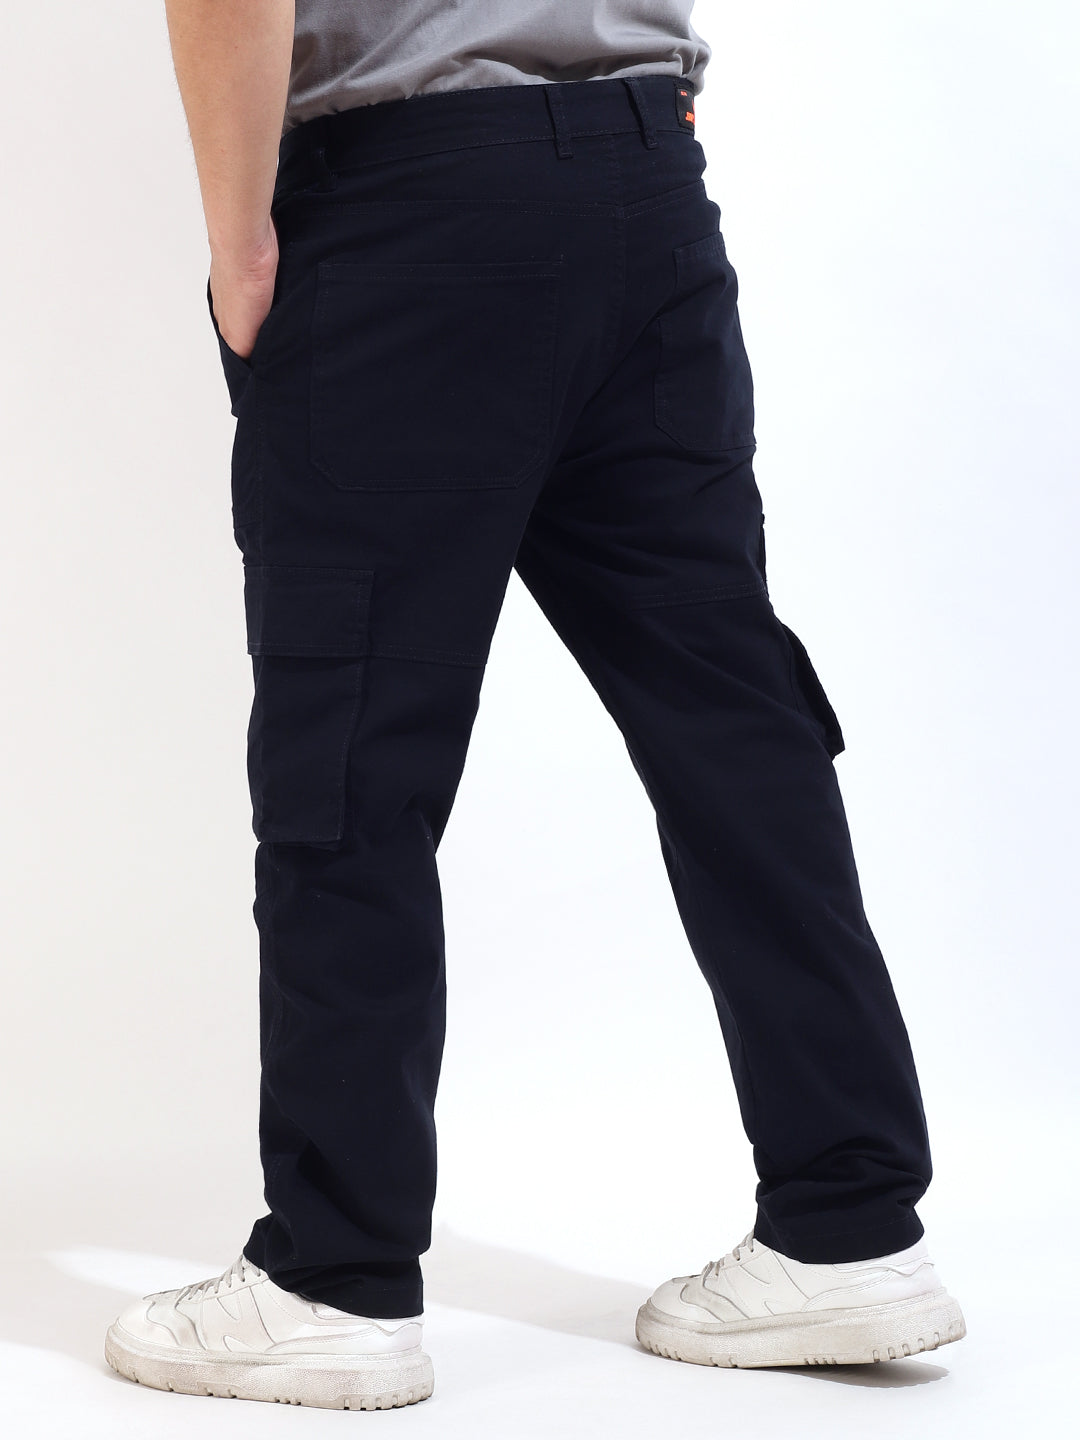 Navy Baggy Fit Open Bottom Cotton Cargo